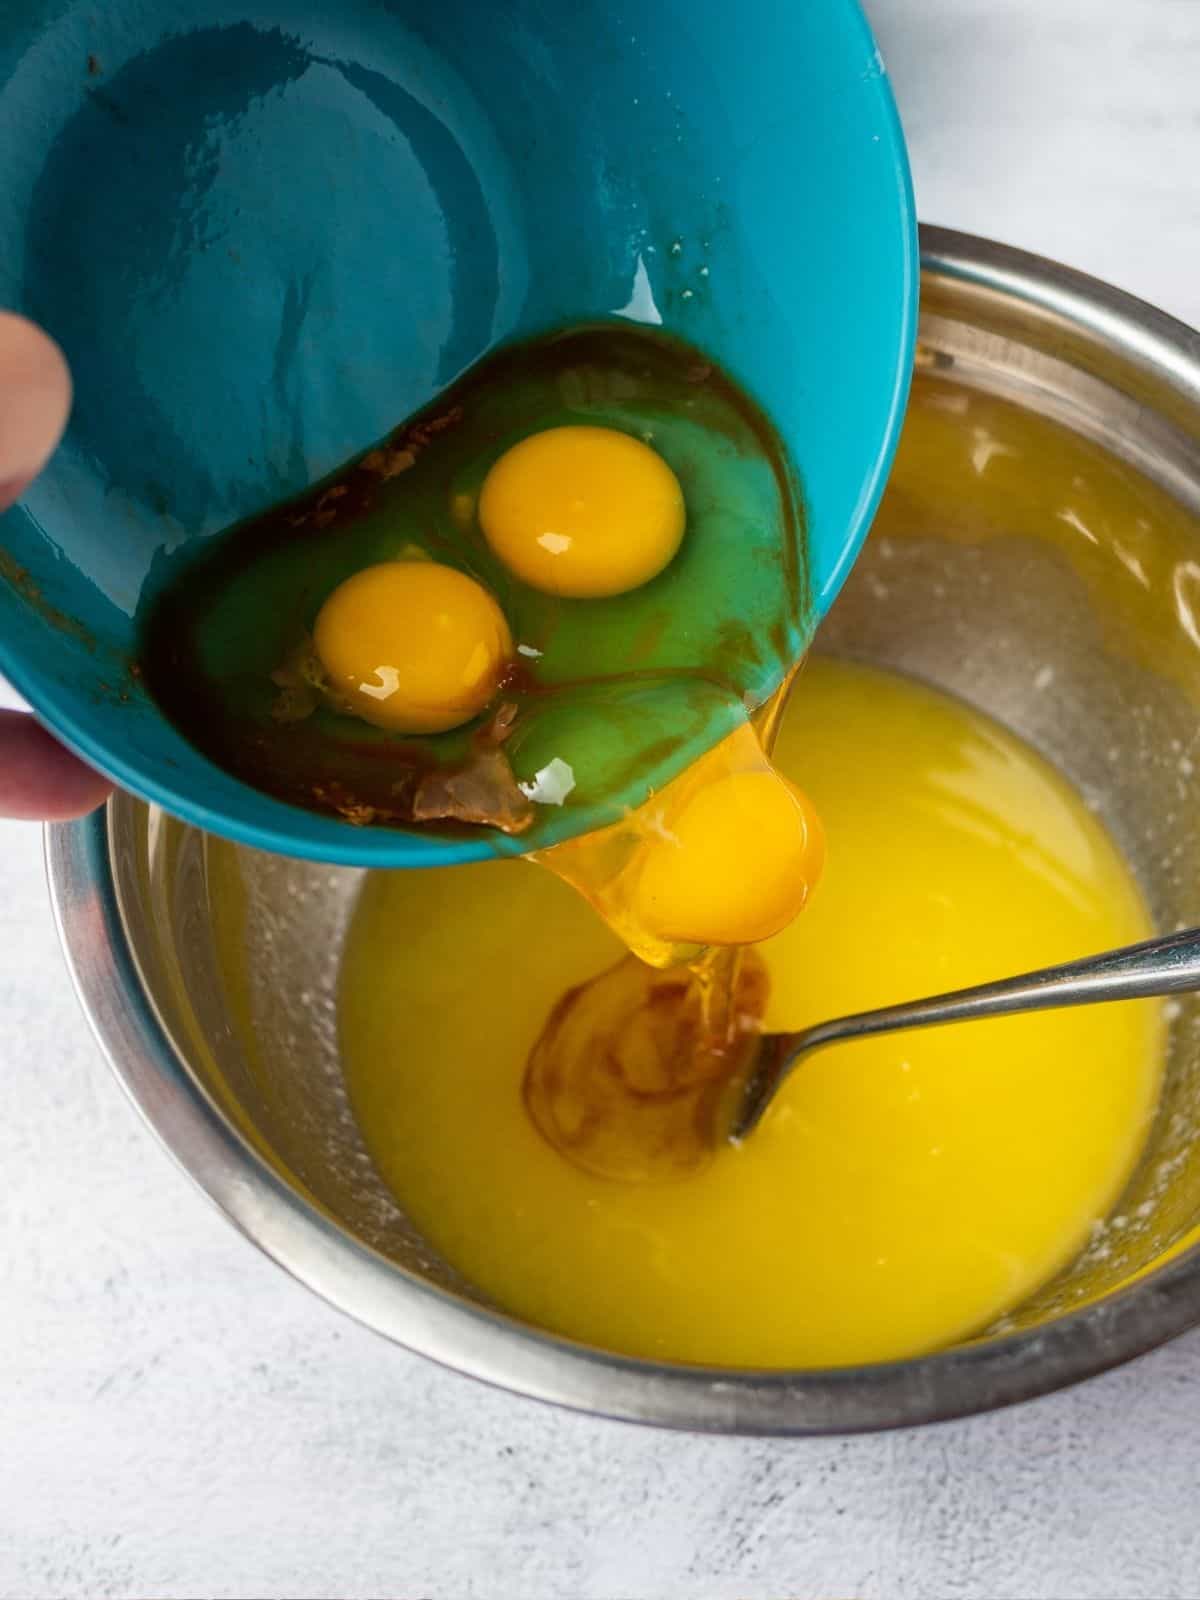 Add eggs to melted butter in bowl.